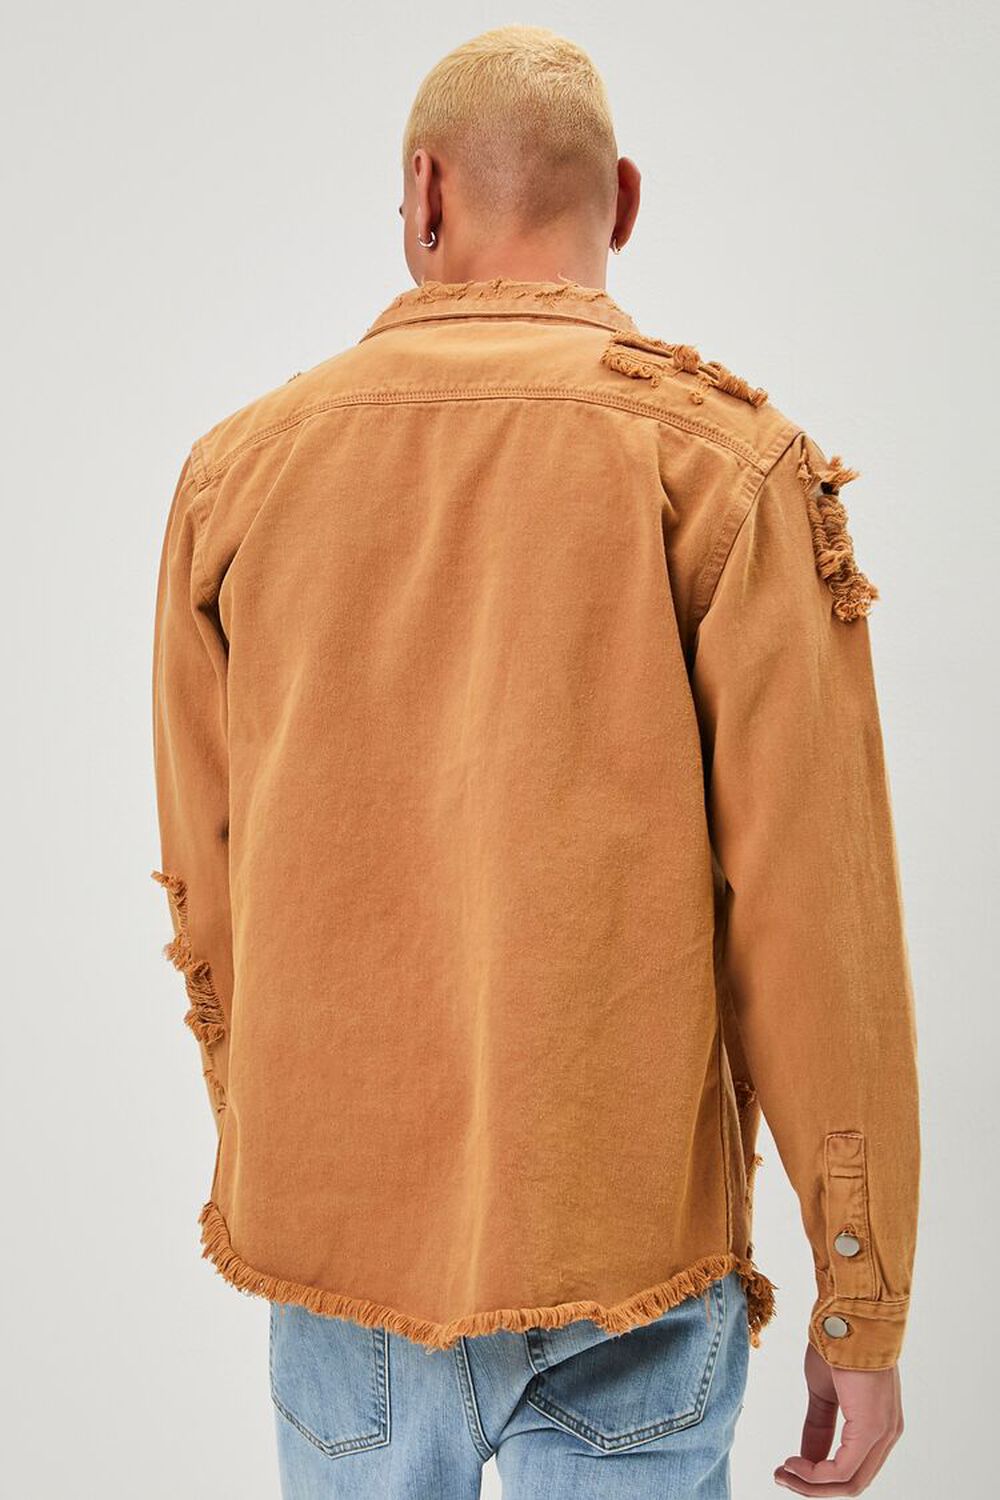 GOLD Distressed Button-Front Jacket, image 3